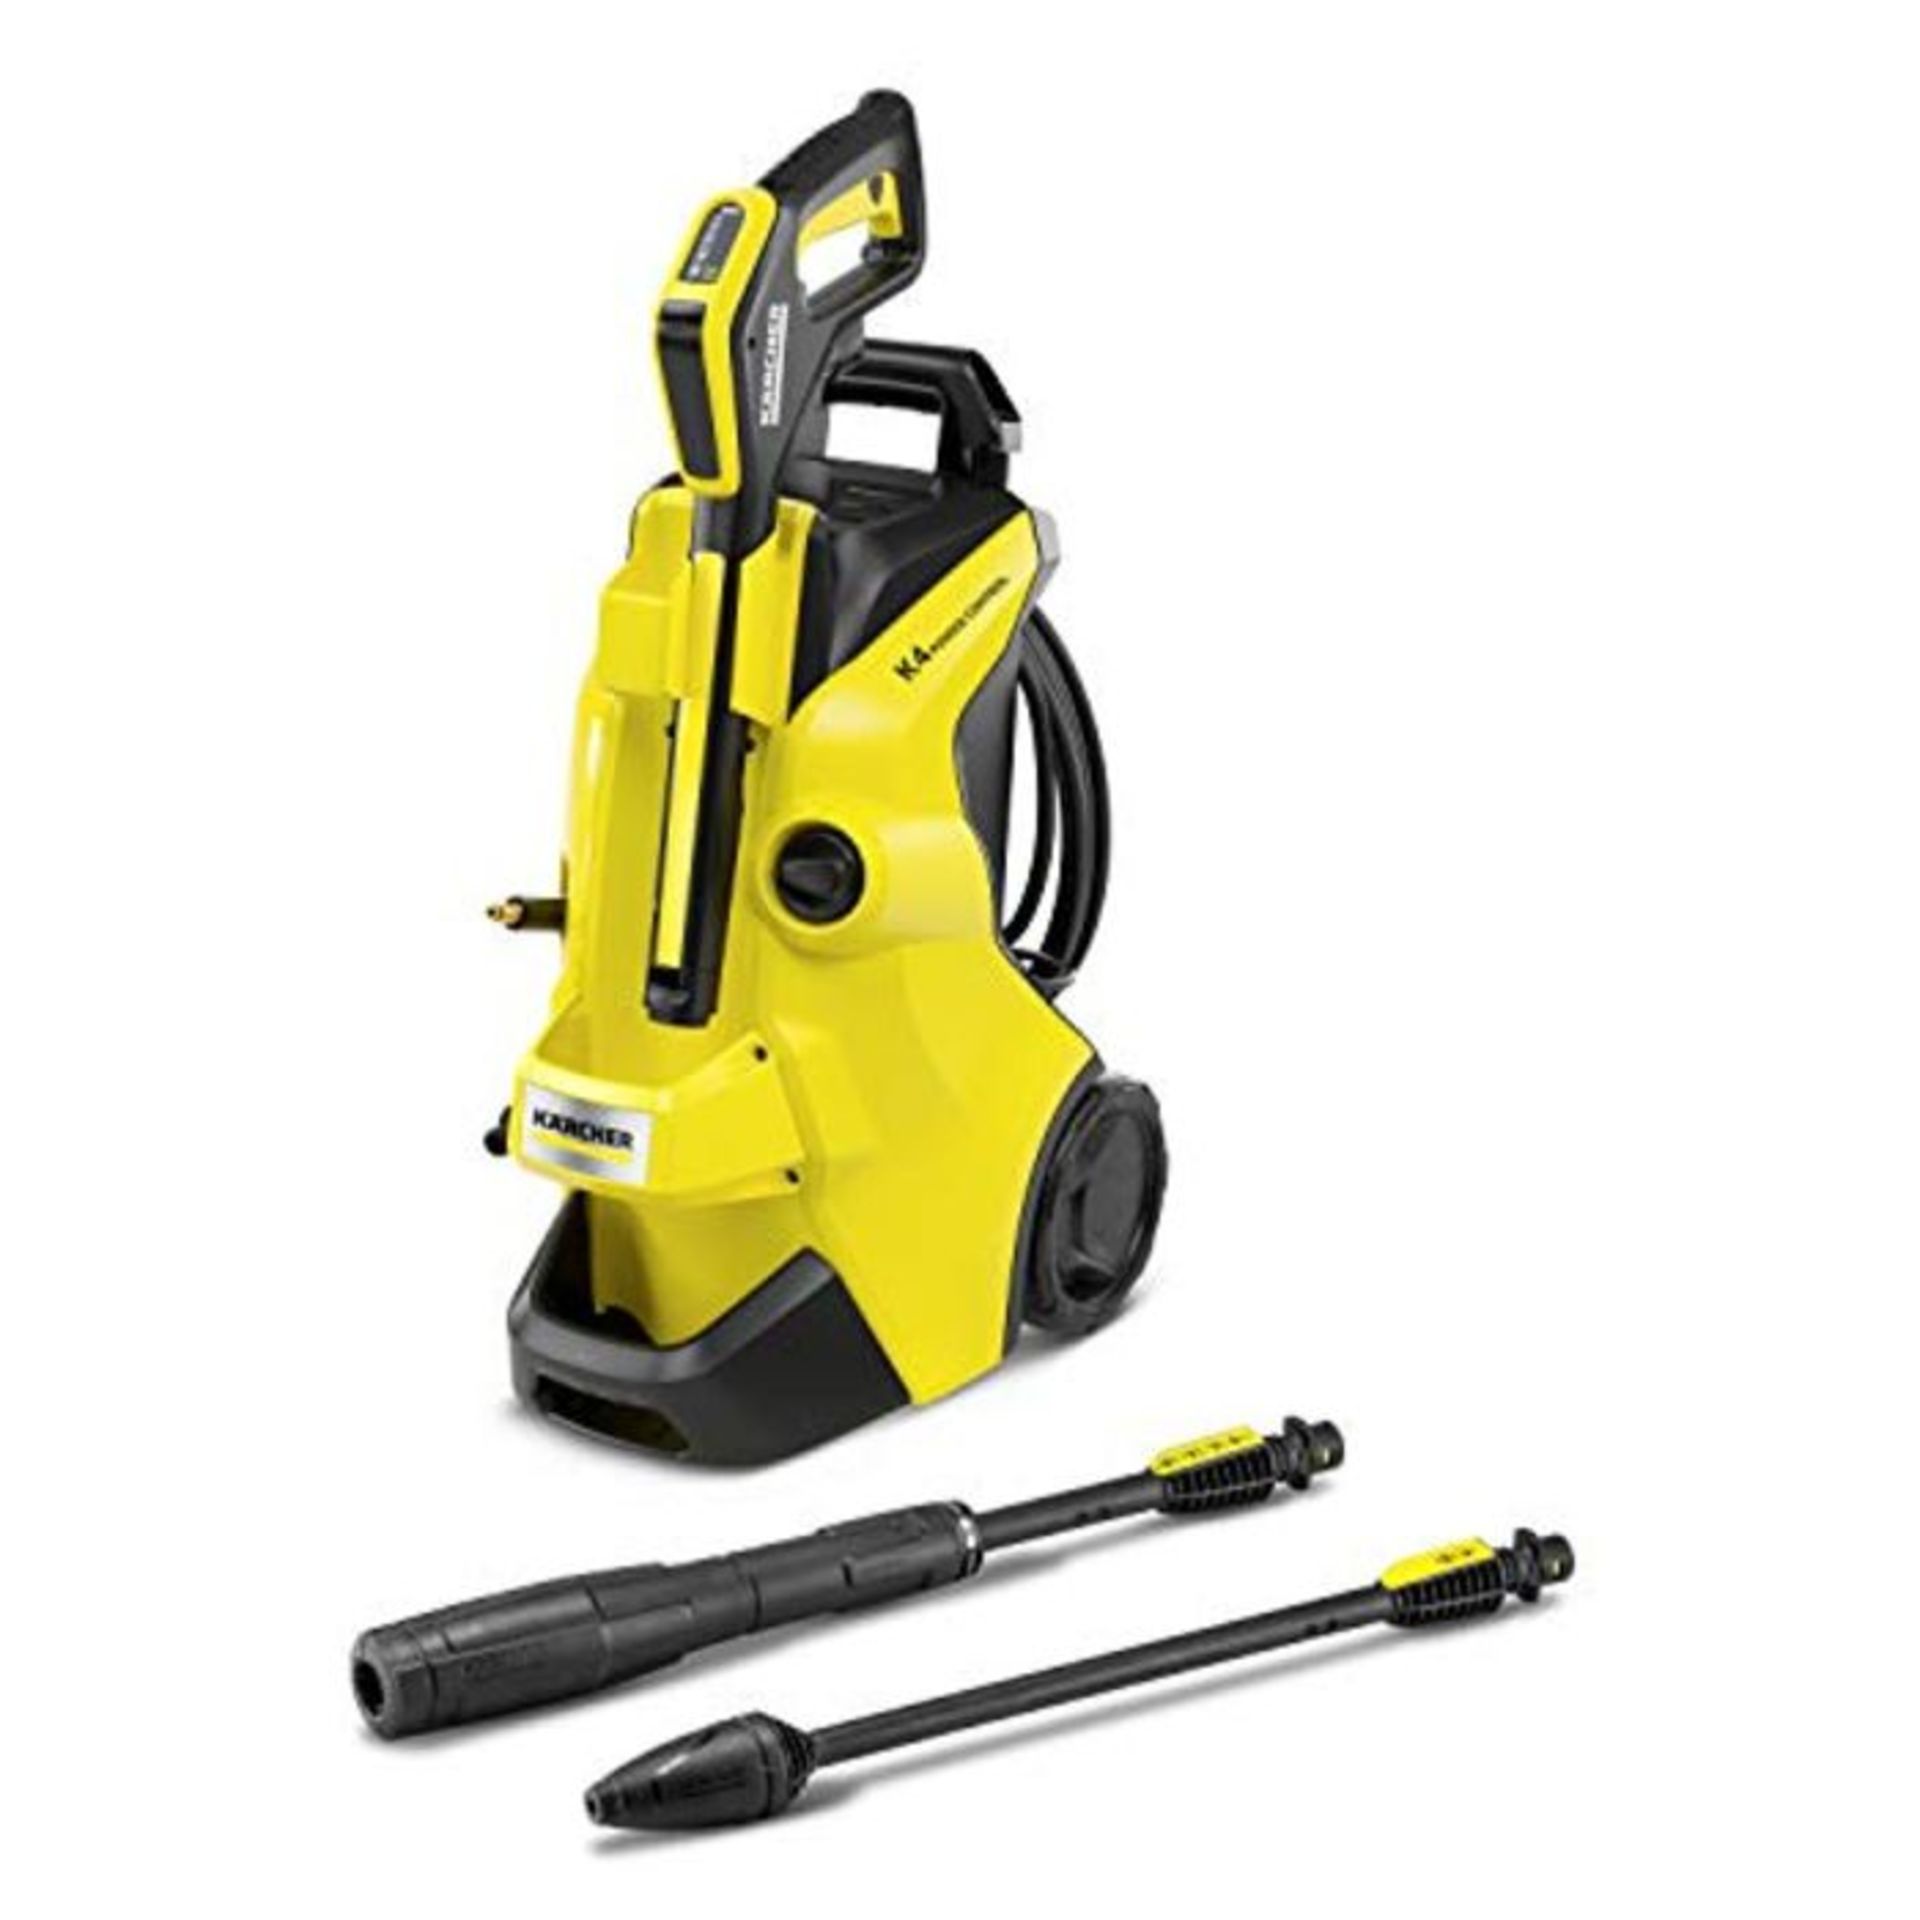 RRP £185.00 Kärcher K 4 Power Control high pressure washer: Intelligent app support - the right s